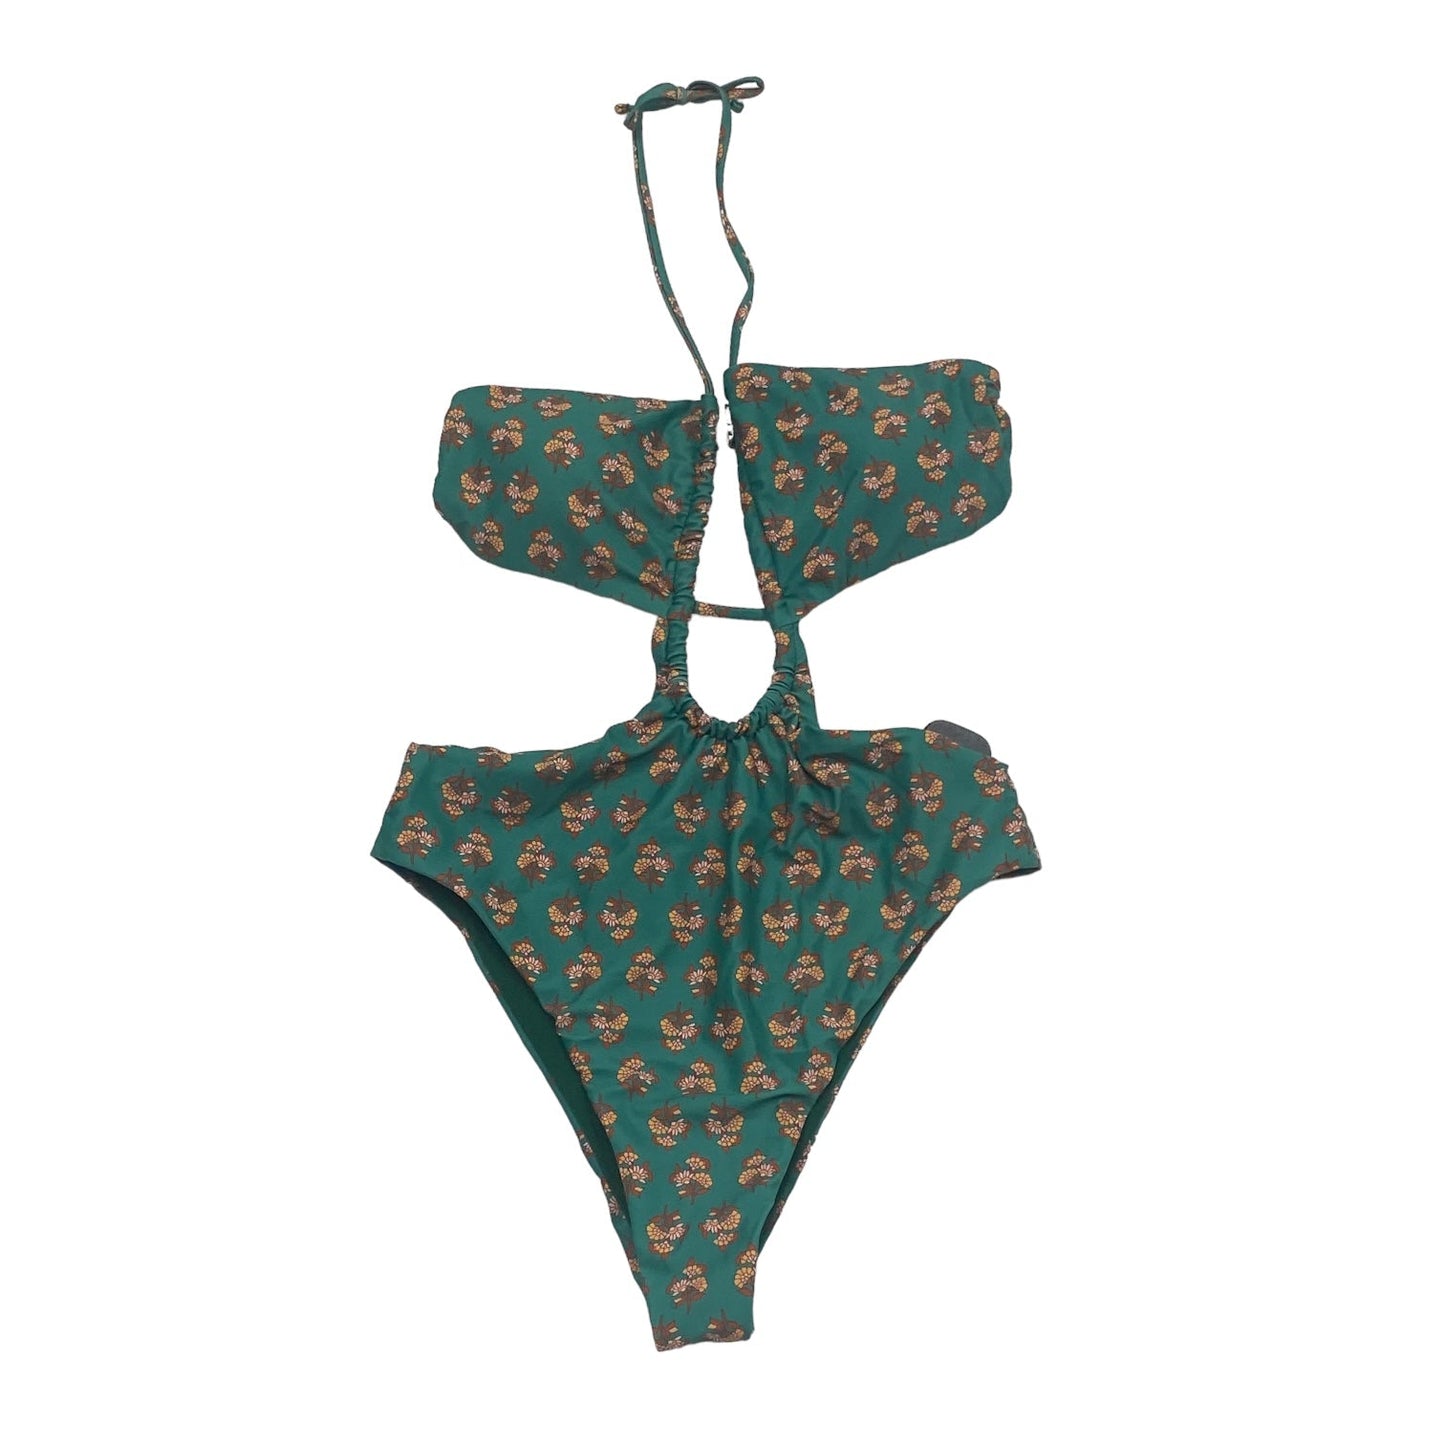 Green Swimsuit Cmc, Size S